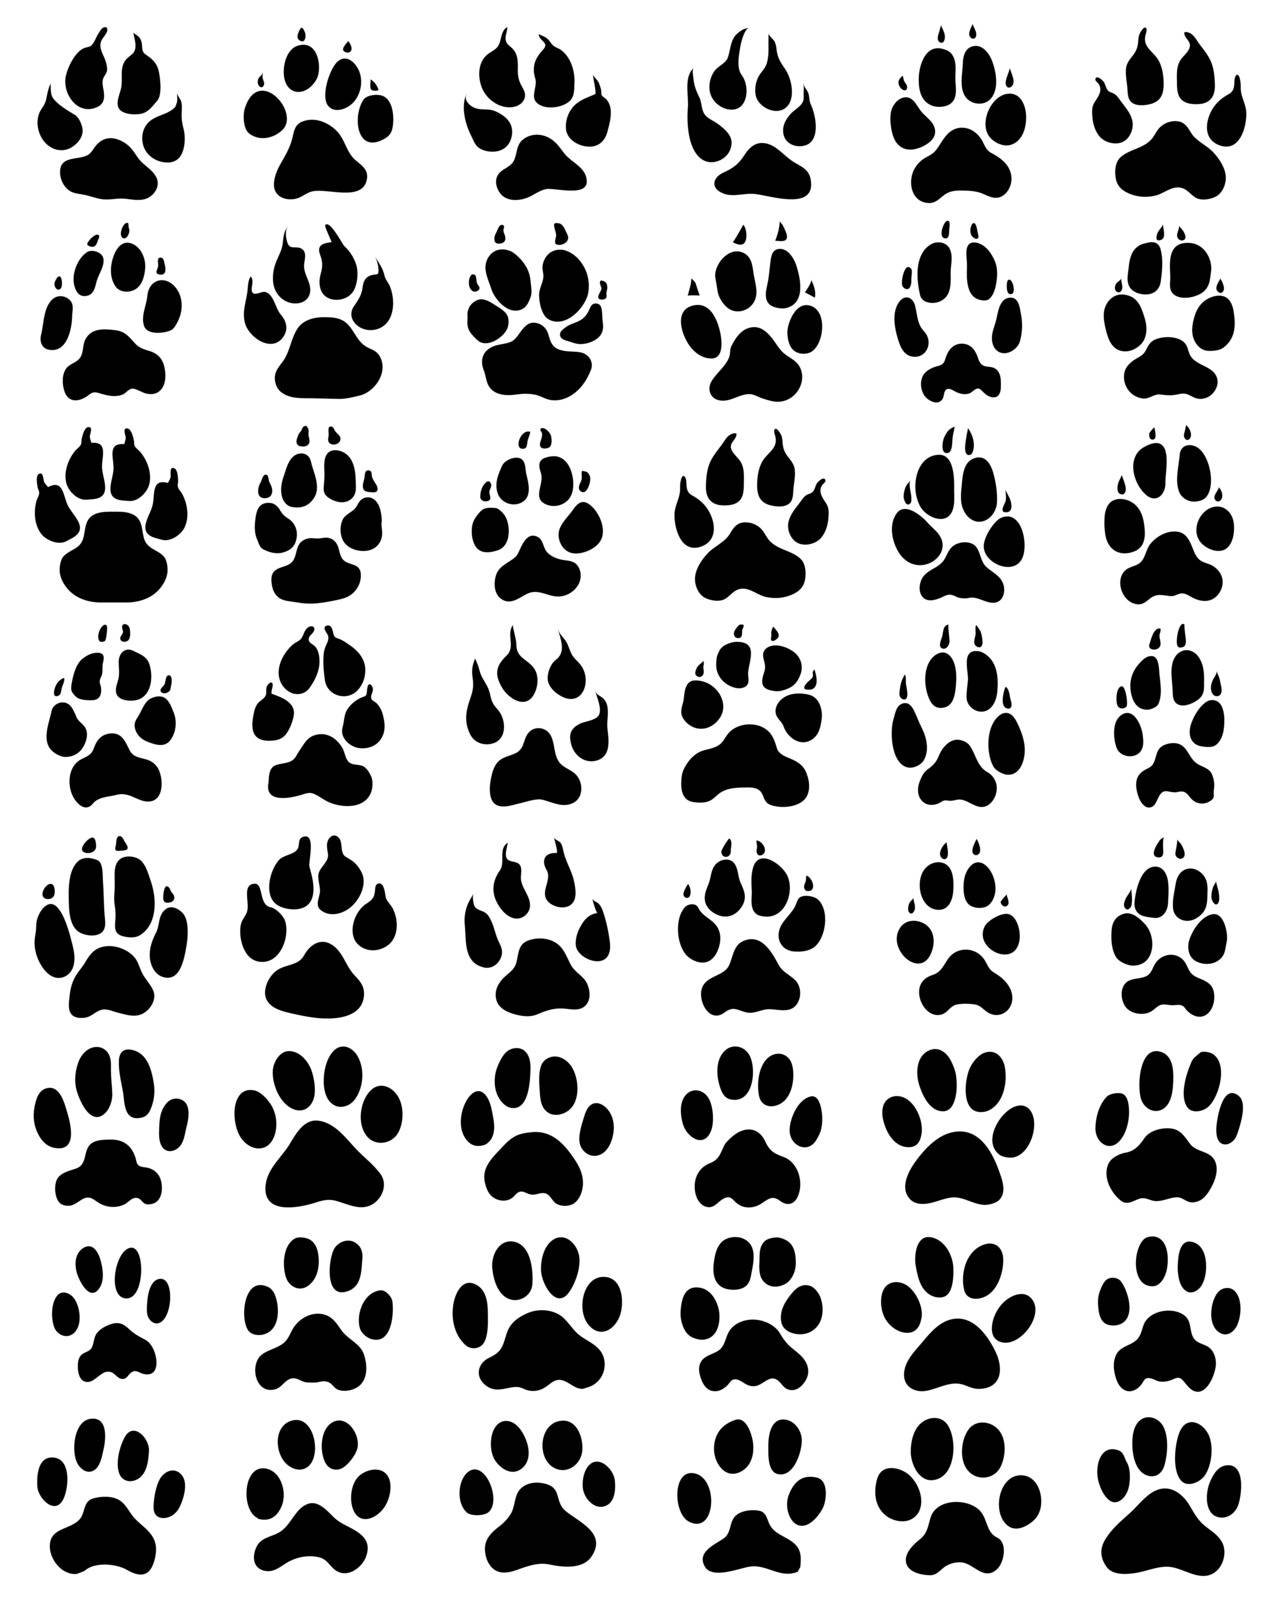 print of paws of dogs and cats by ratkomat